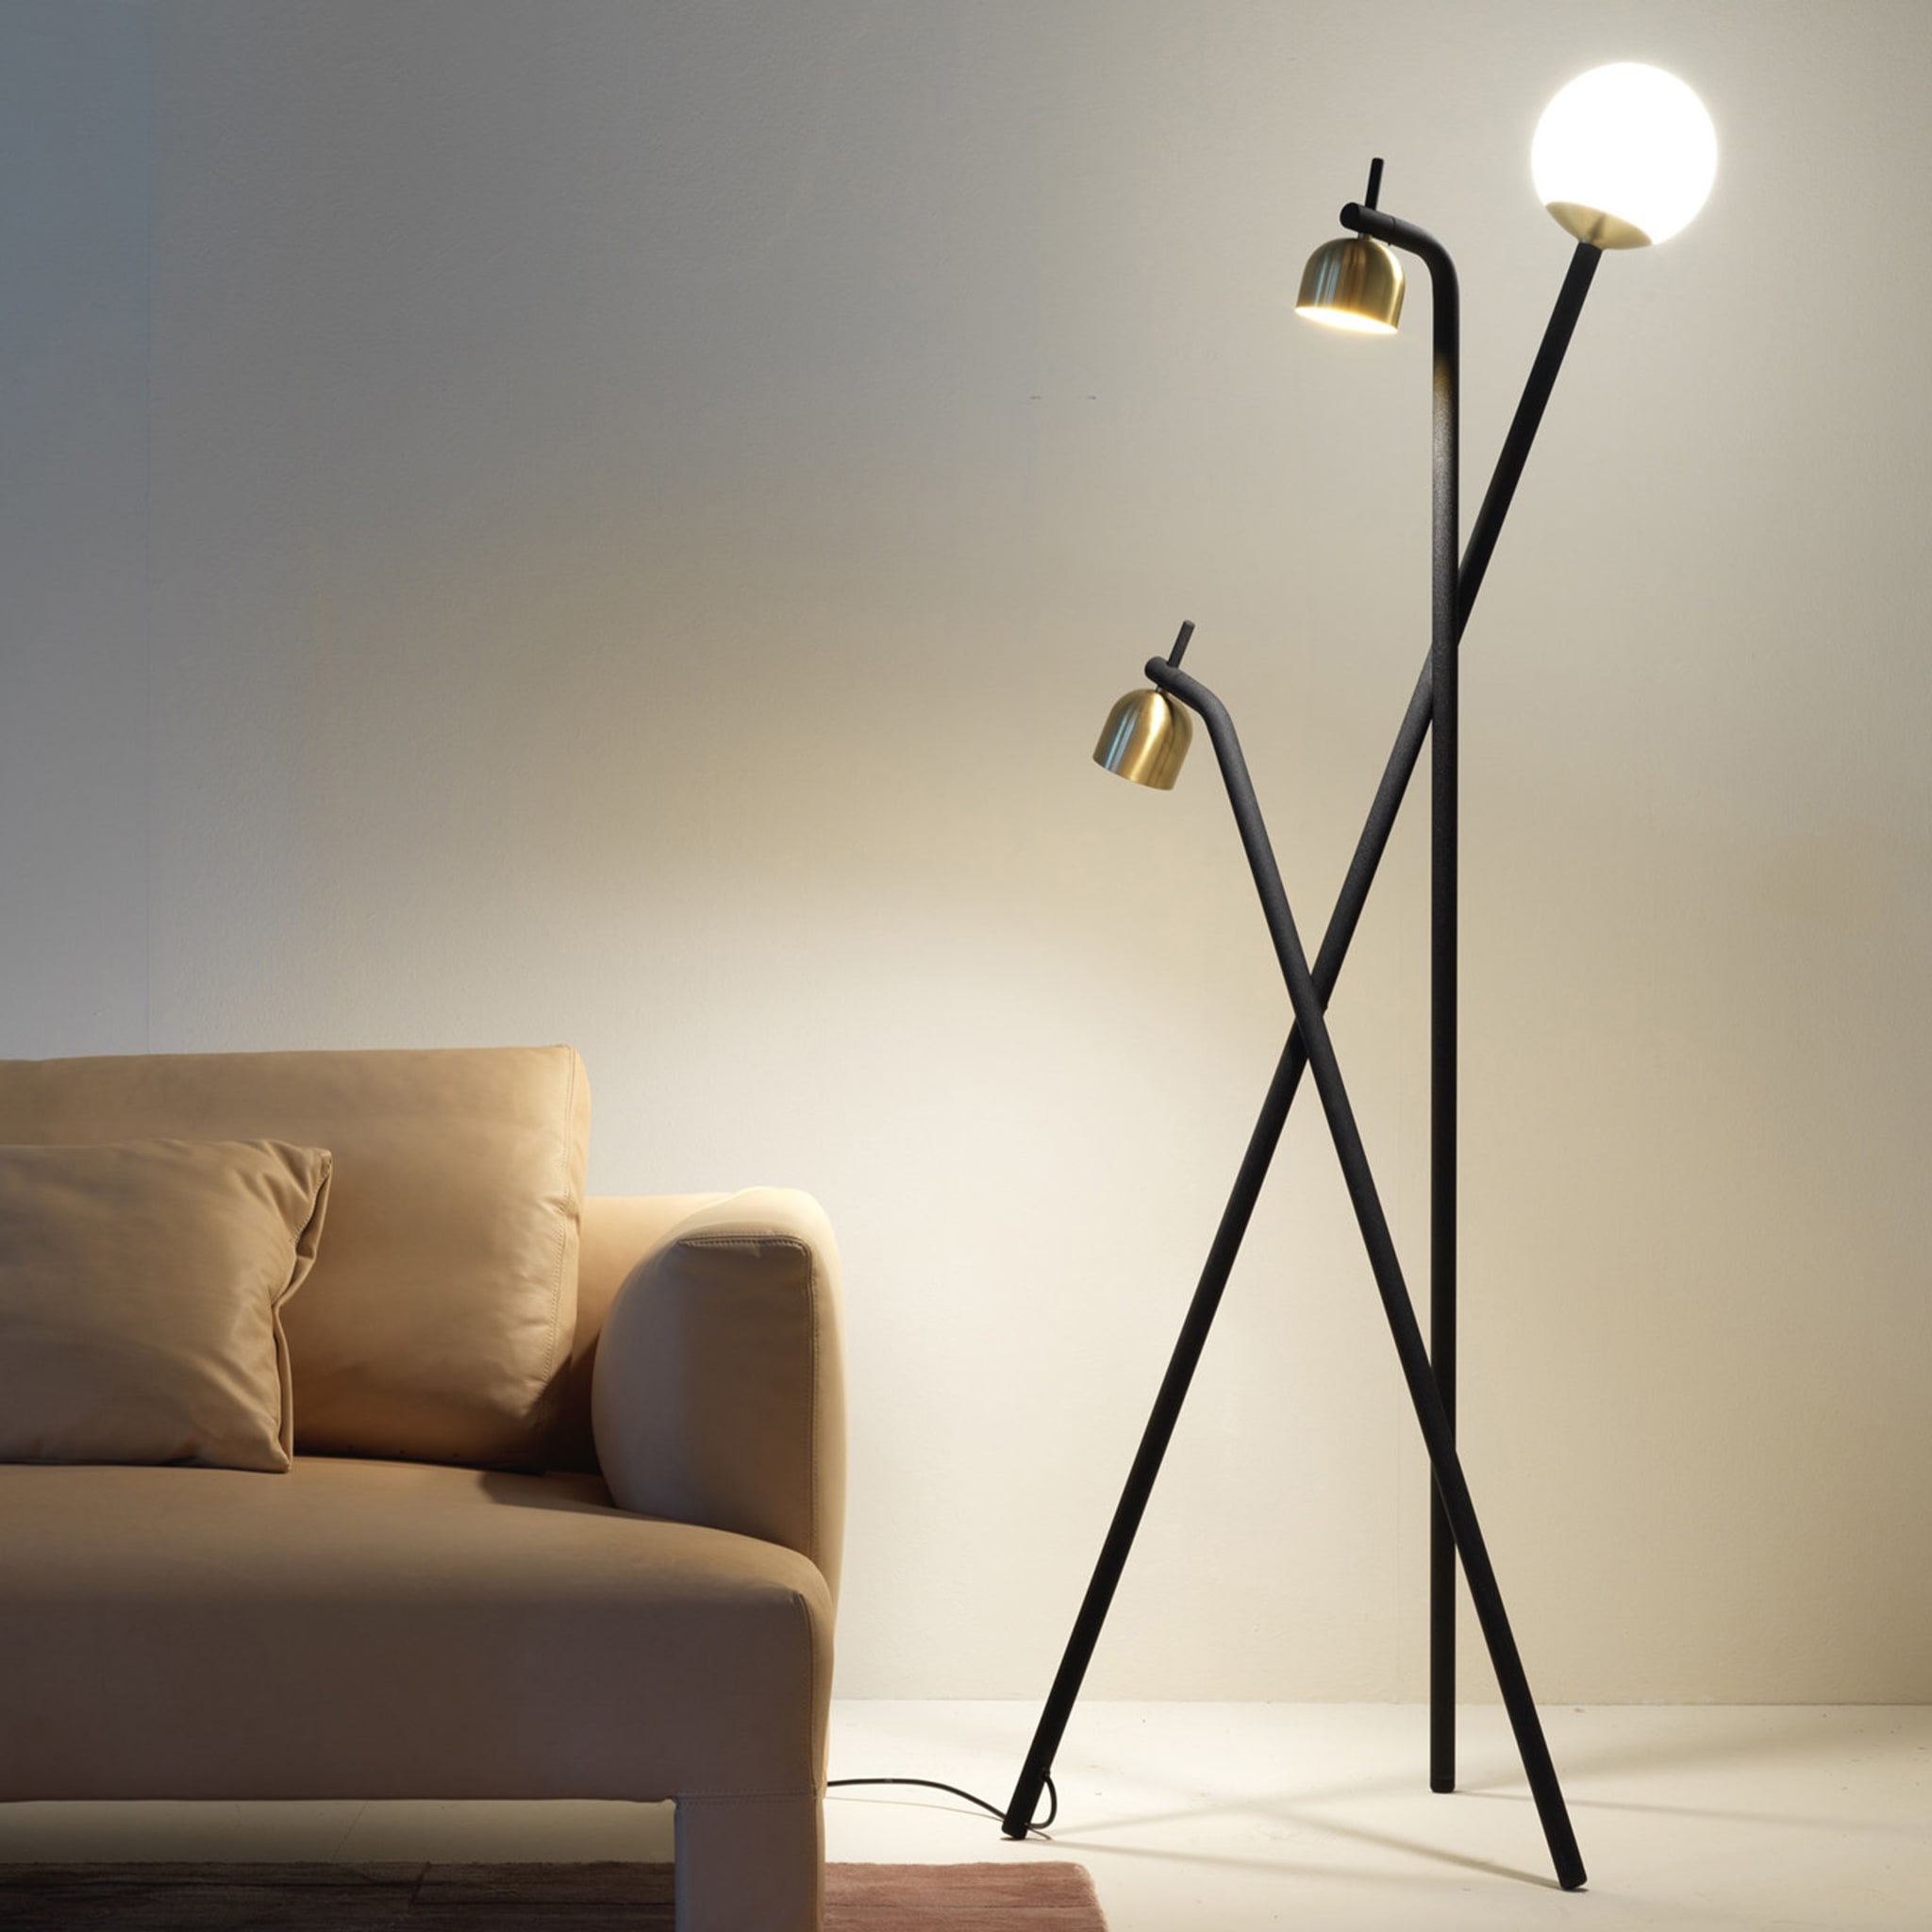 Tripold Floor Lamp by Front Design - Alternative view 3